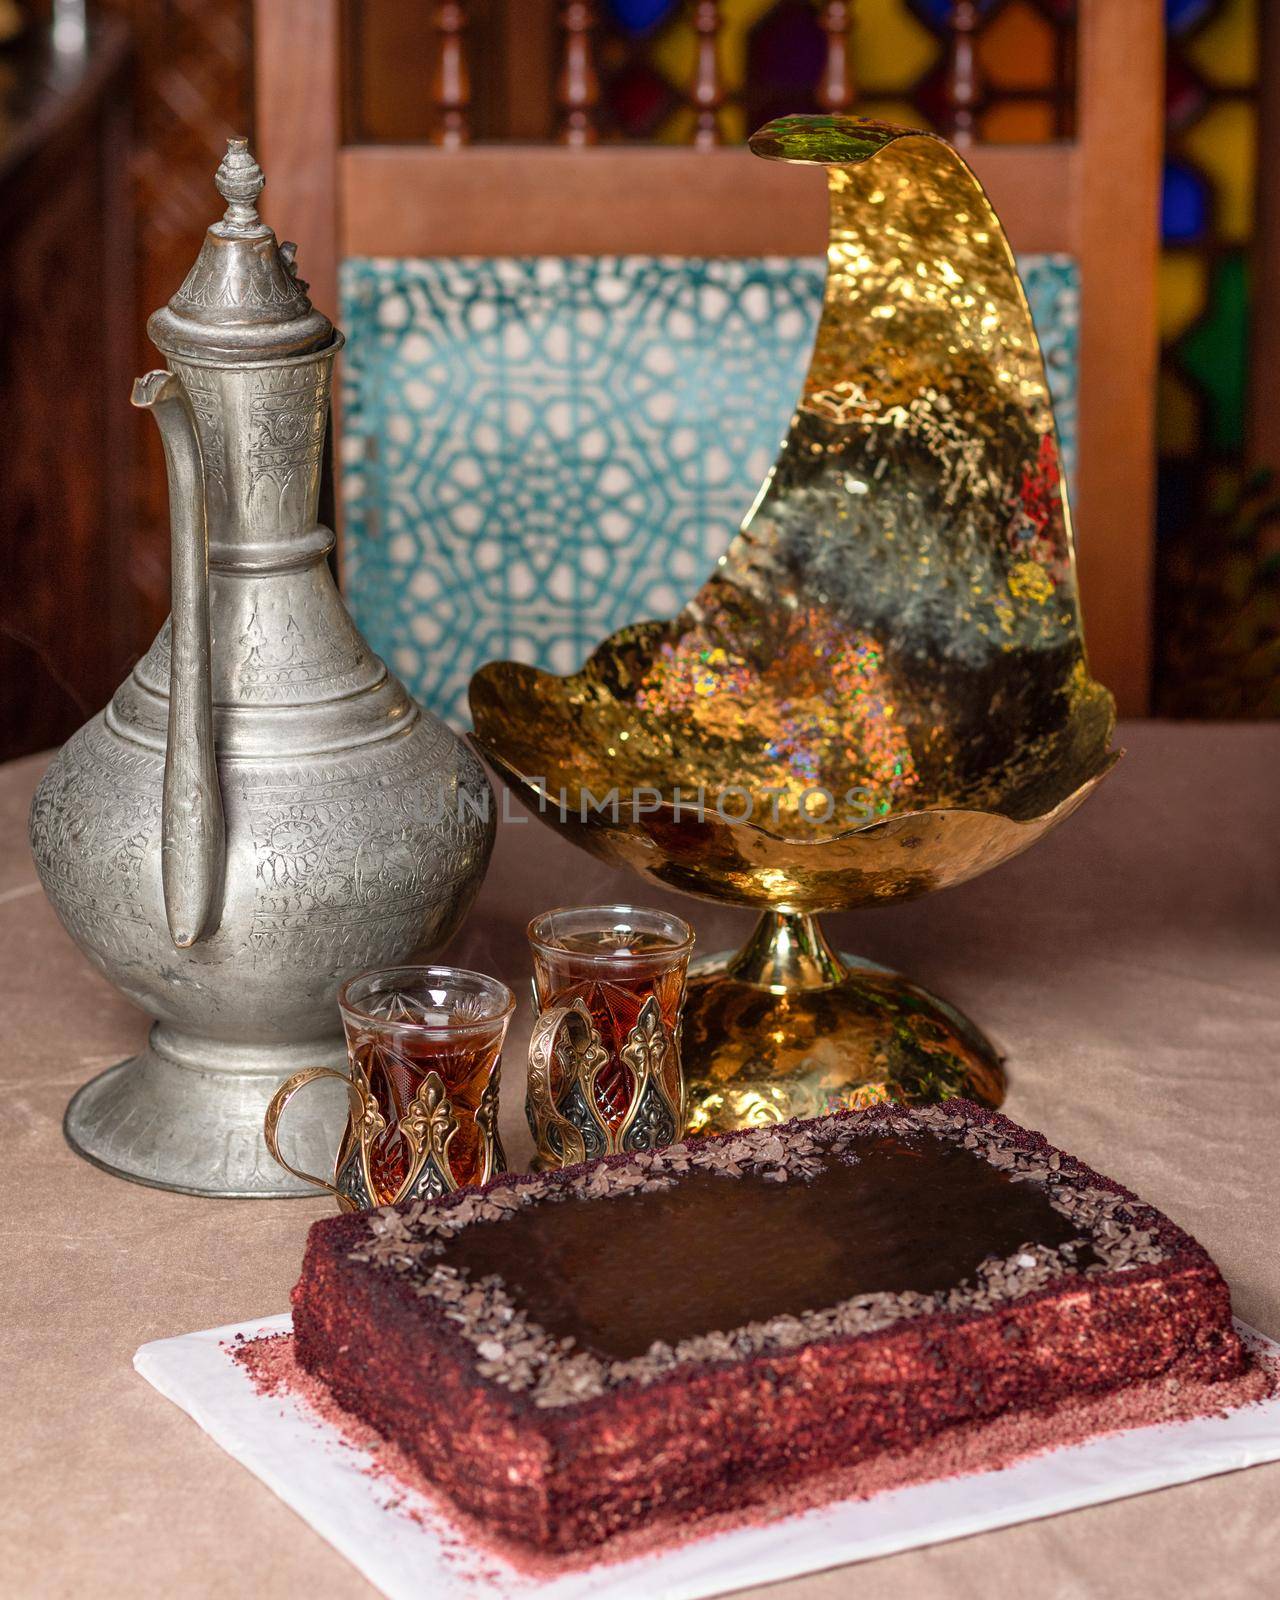 Arabic teapot glass and cake close up